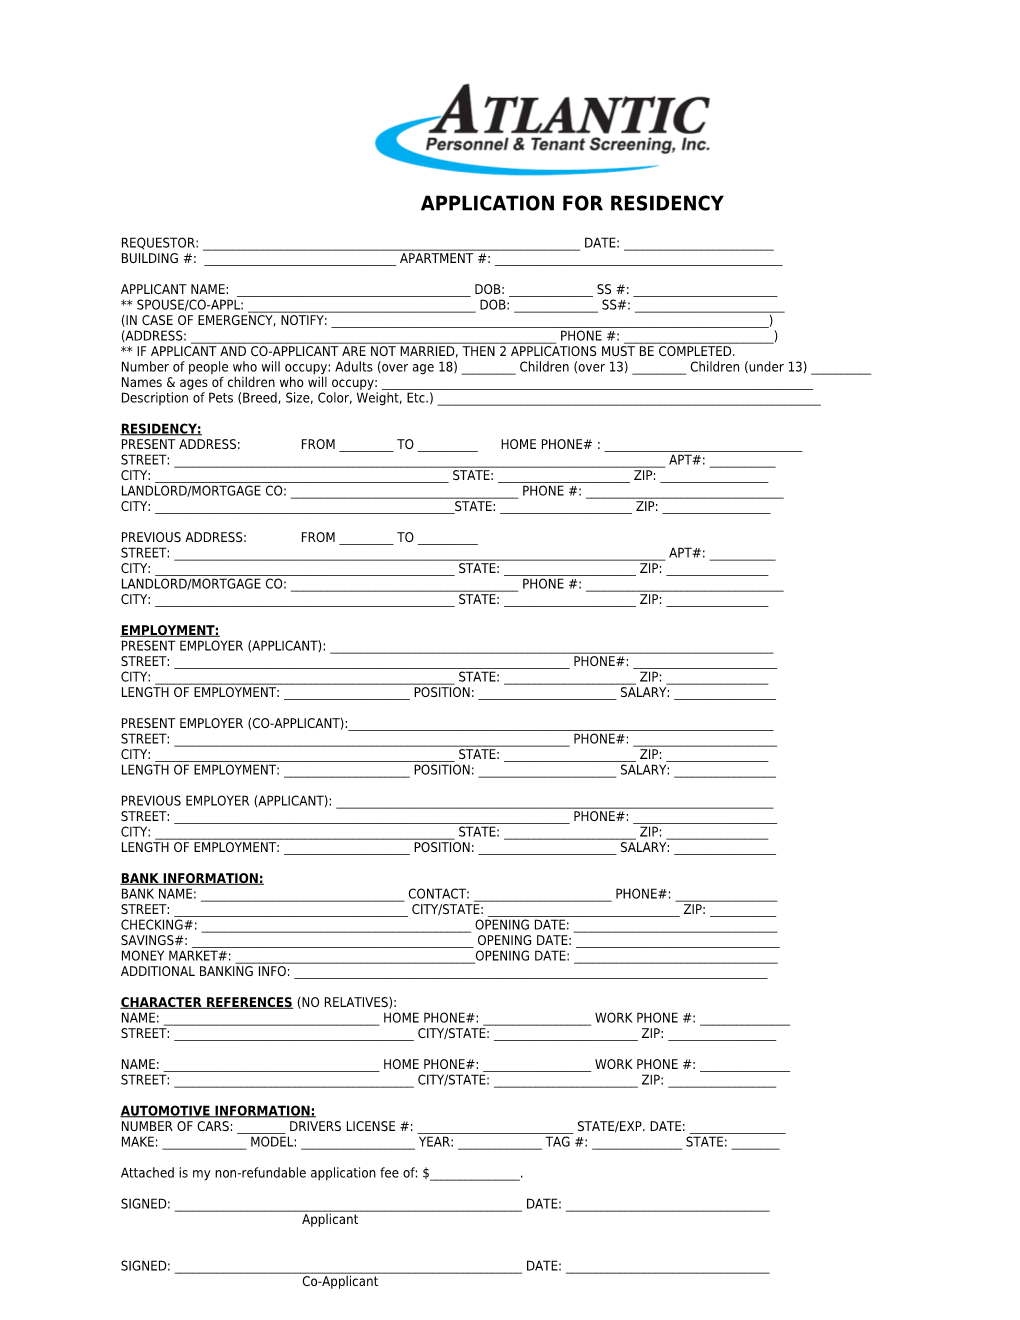 Tenant--Disclosure And Authorization Form (00479782-3).DOC